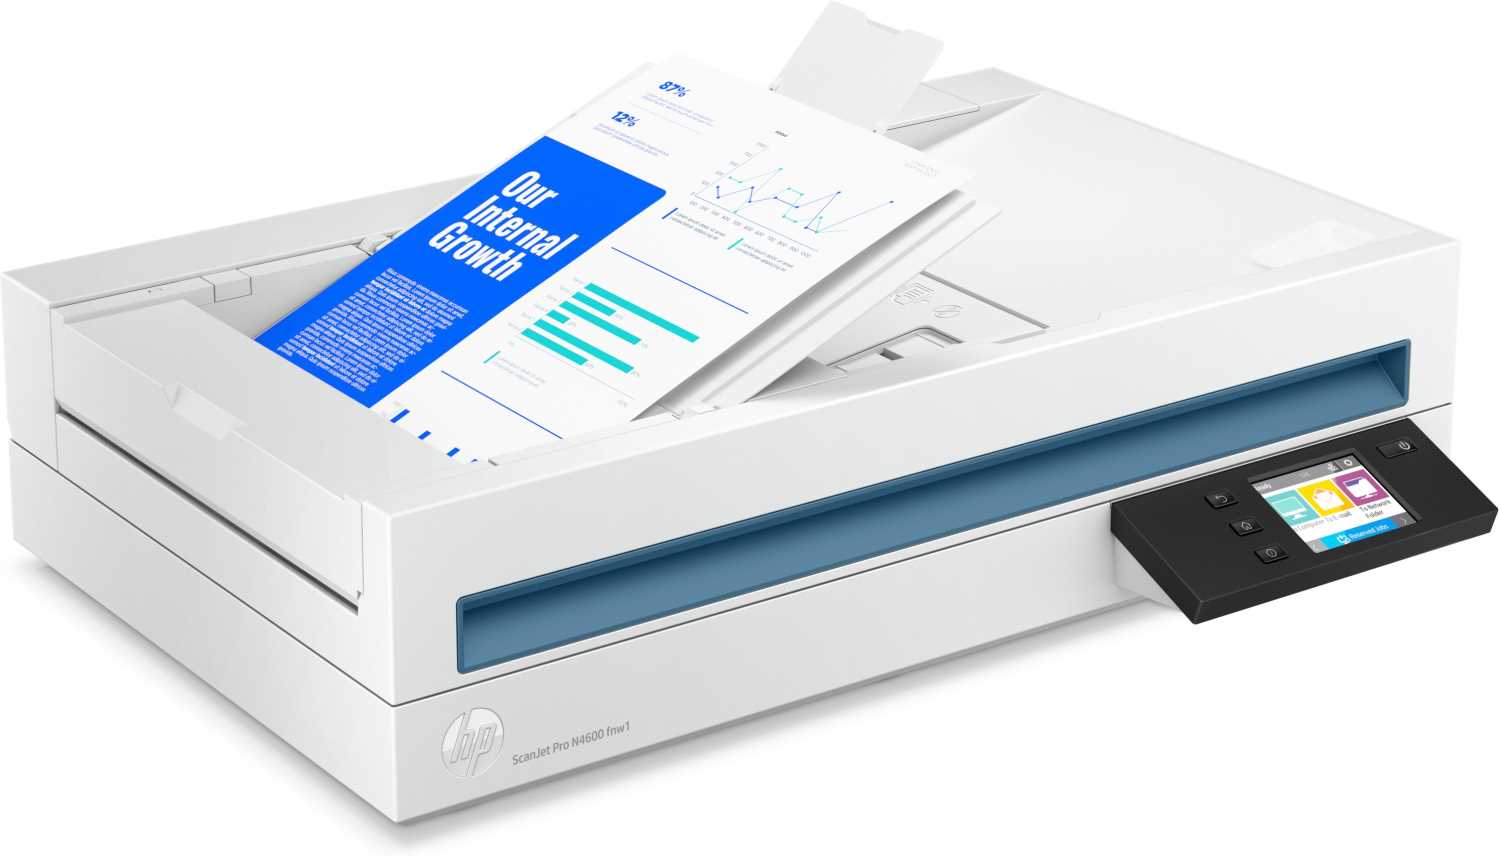 Сканер HP 20G07A ScanJet Pro N4600 fnw1 (A4) 600x600 dpi, 48 bit, ADF (100 pages), 40 ppm,Ethernet, USB 3.0, WiFi, Duty cycle 6000 pages